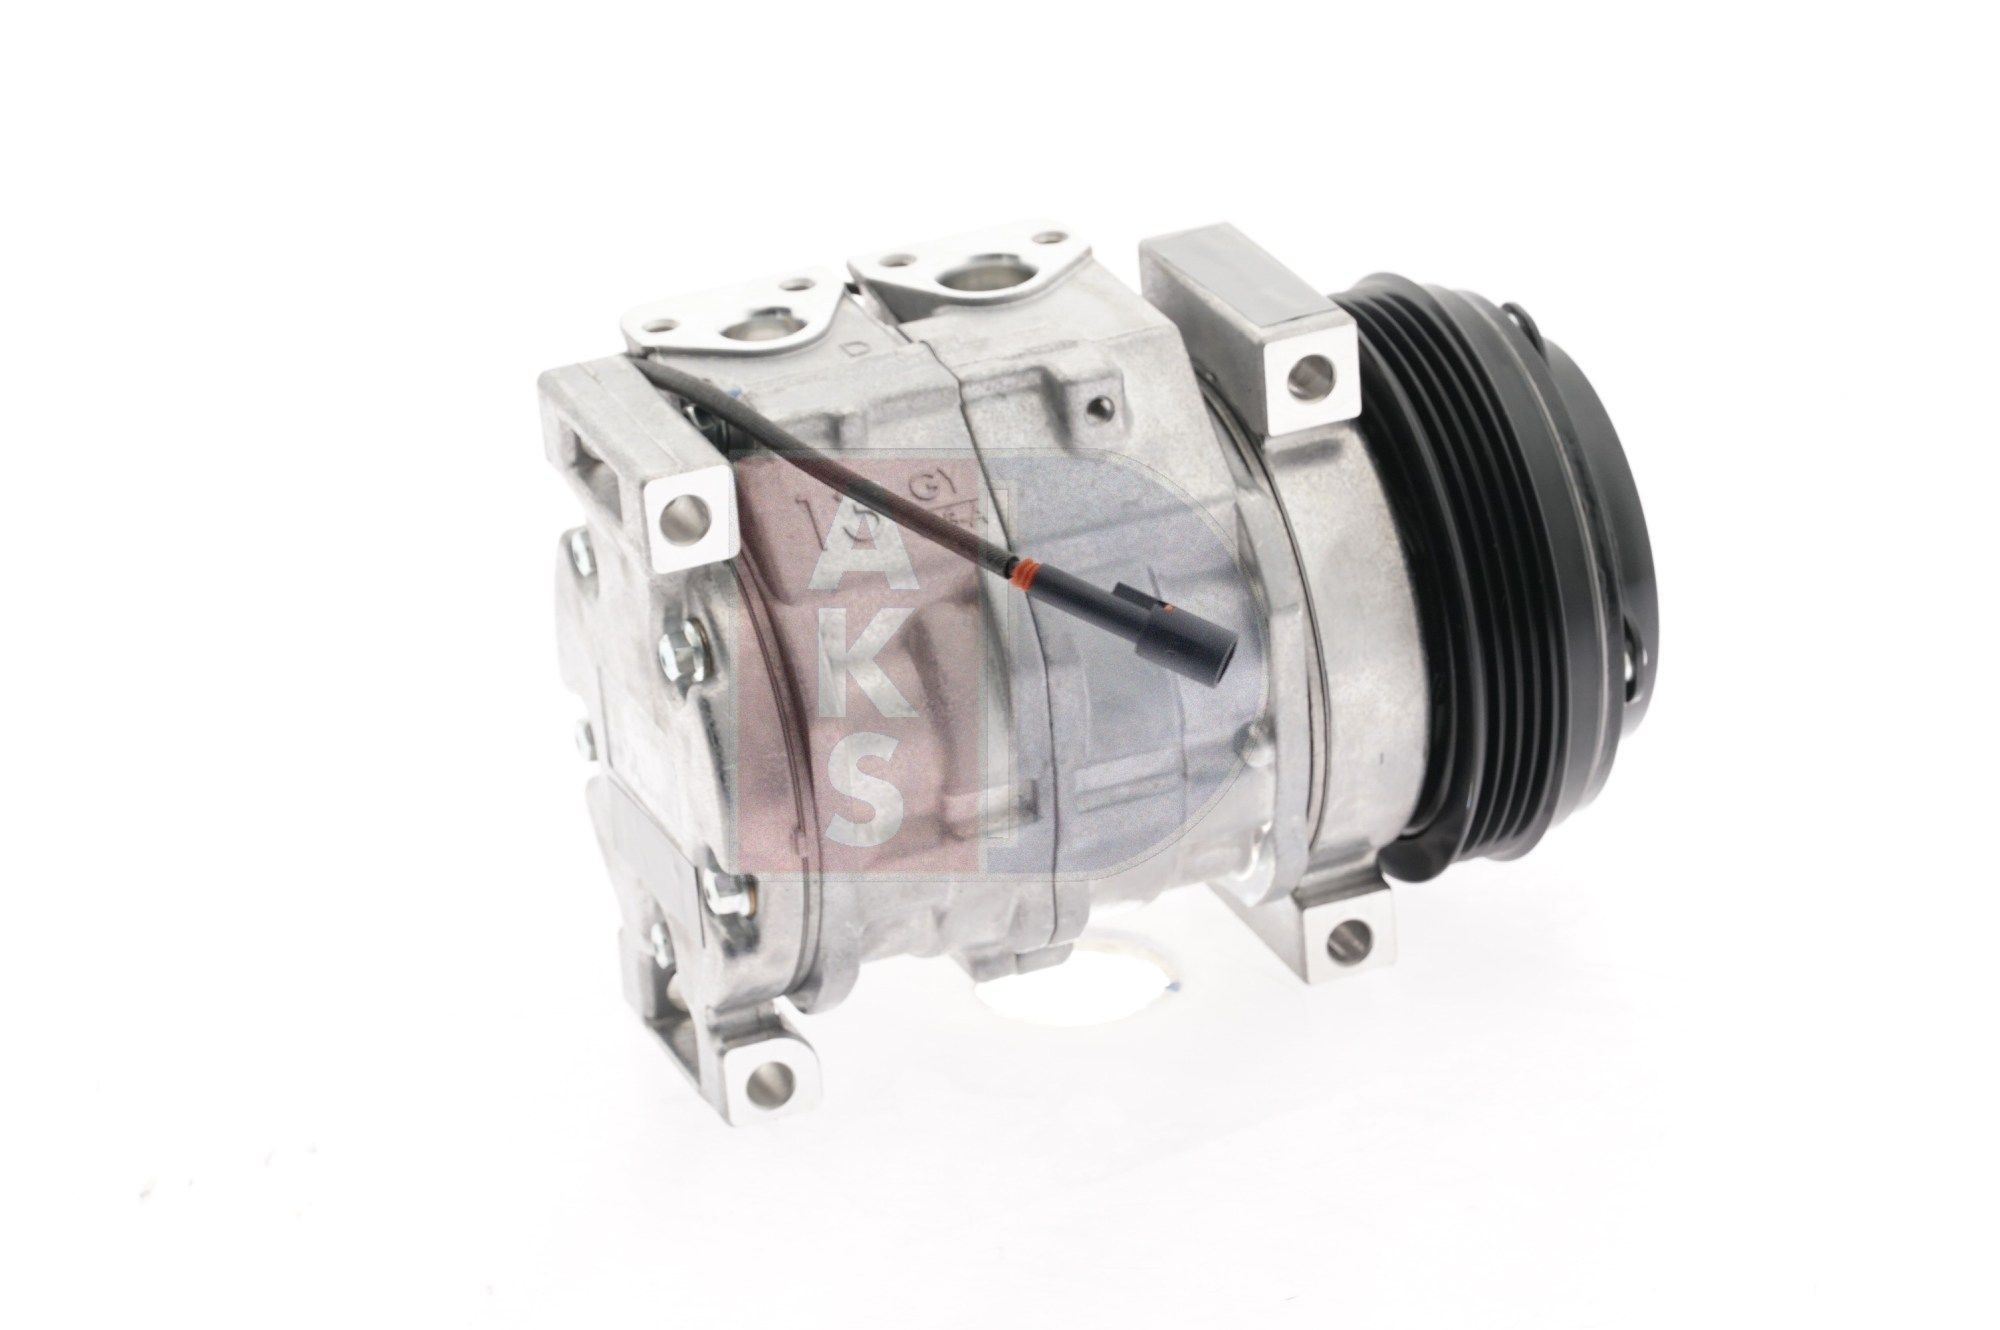 Air conditioning compressor 851888N from AKS DASIS